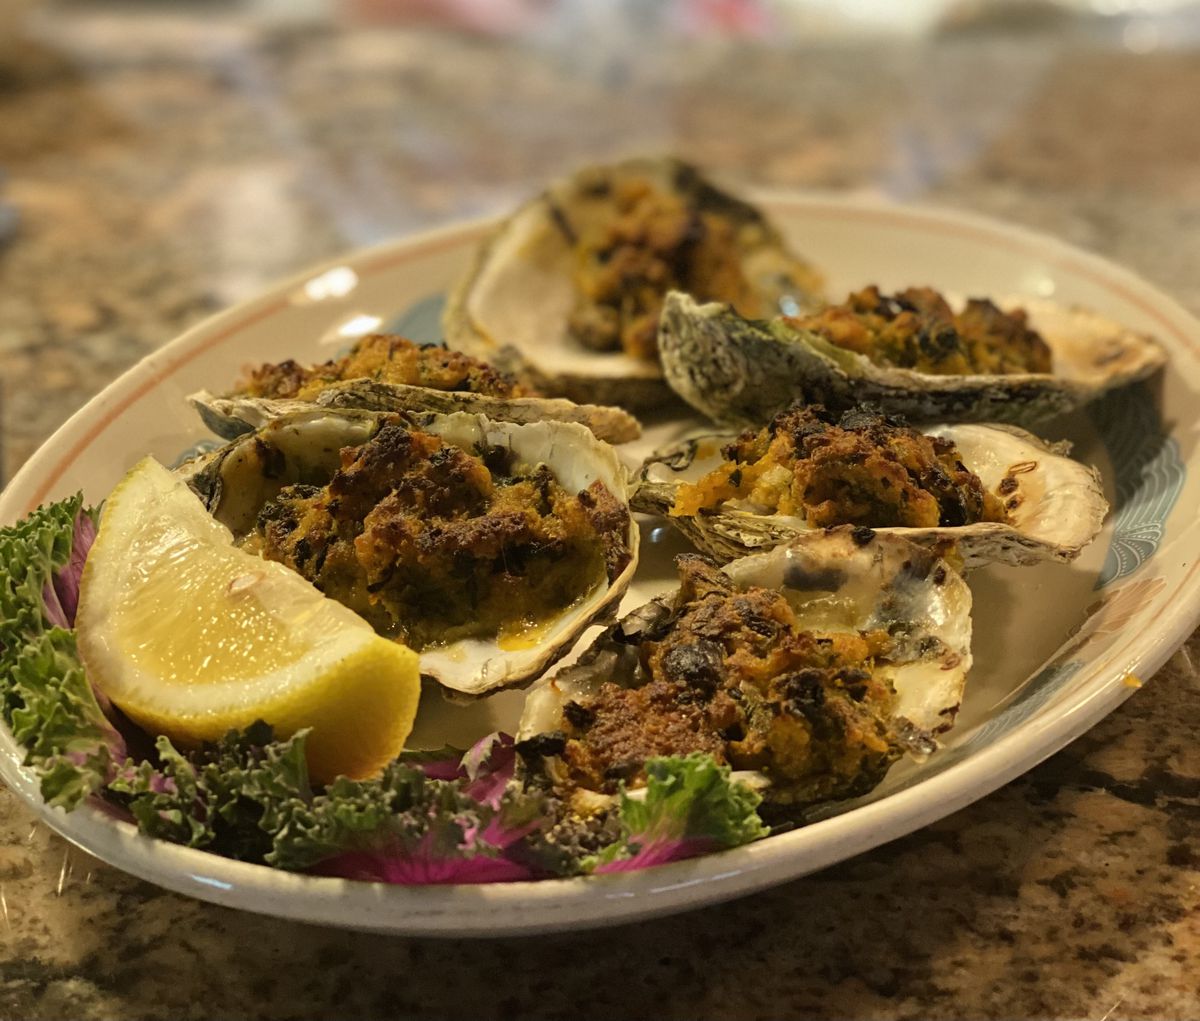 Oysters topped with breadcrumbs and butter.